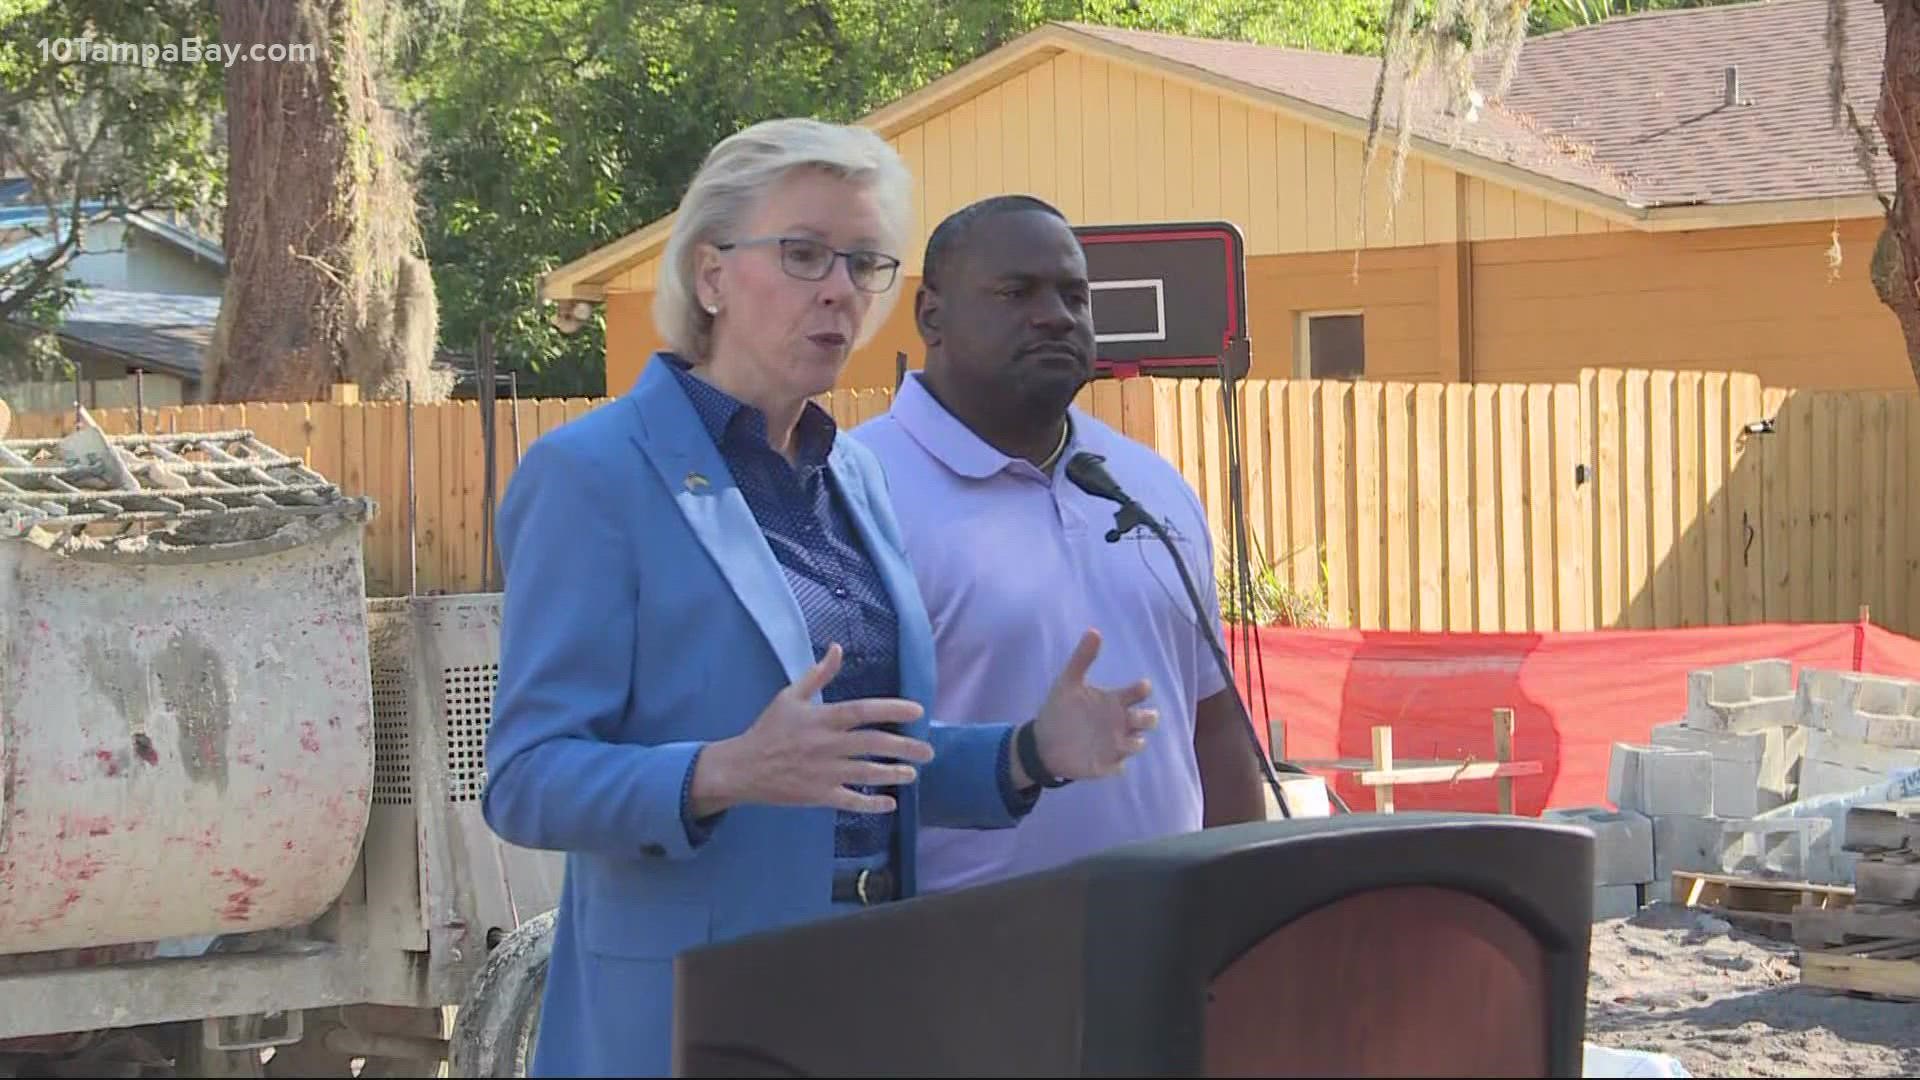 The City of Tampa says a total of 15 lots are being used to build the homes.